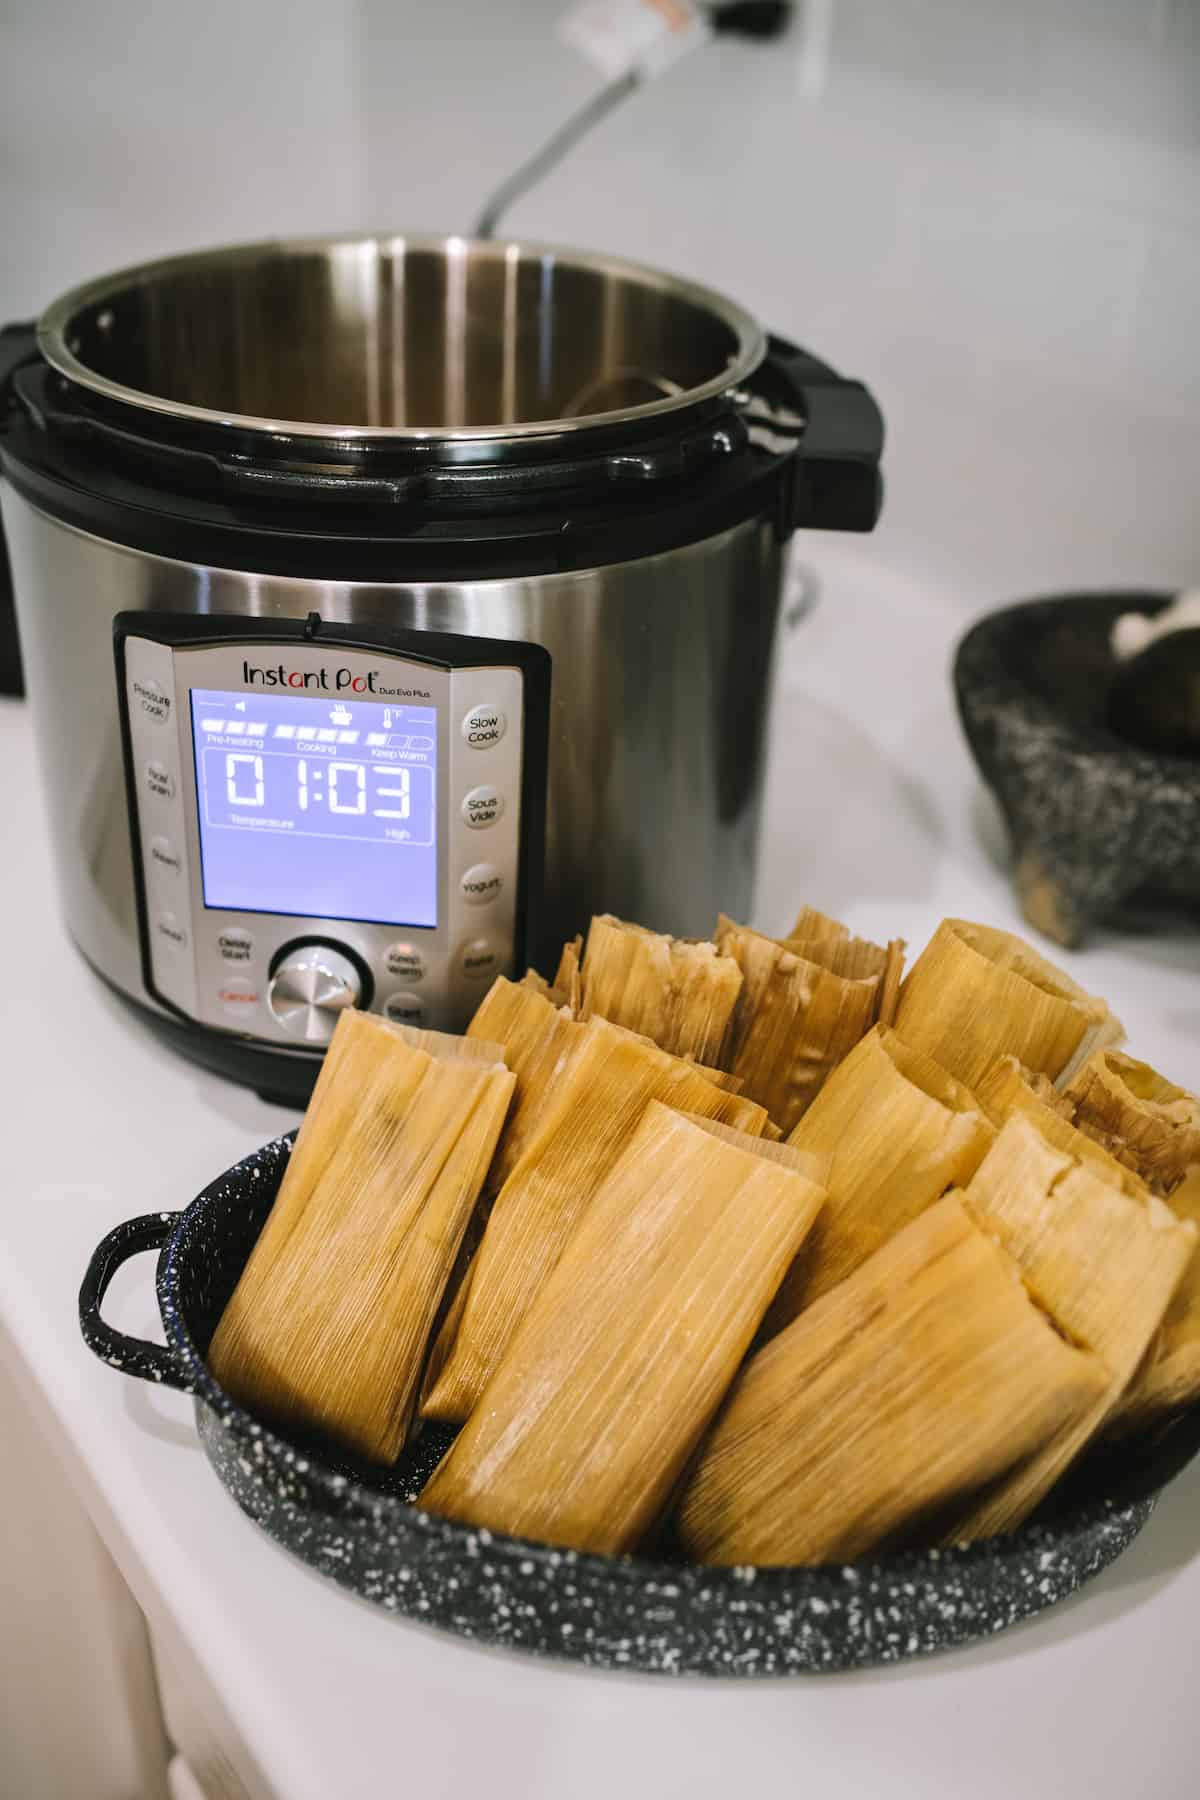 Instant Pot Pork and Roasted Green Chile Tamales after steaming in an earthenware dish next to an instant pot.